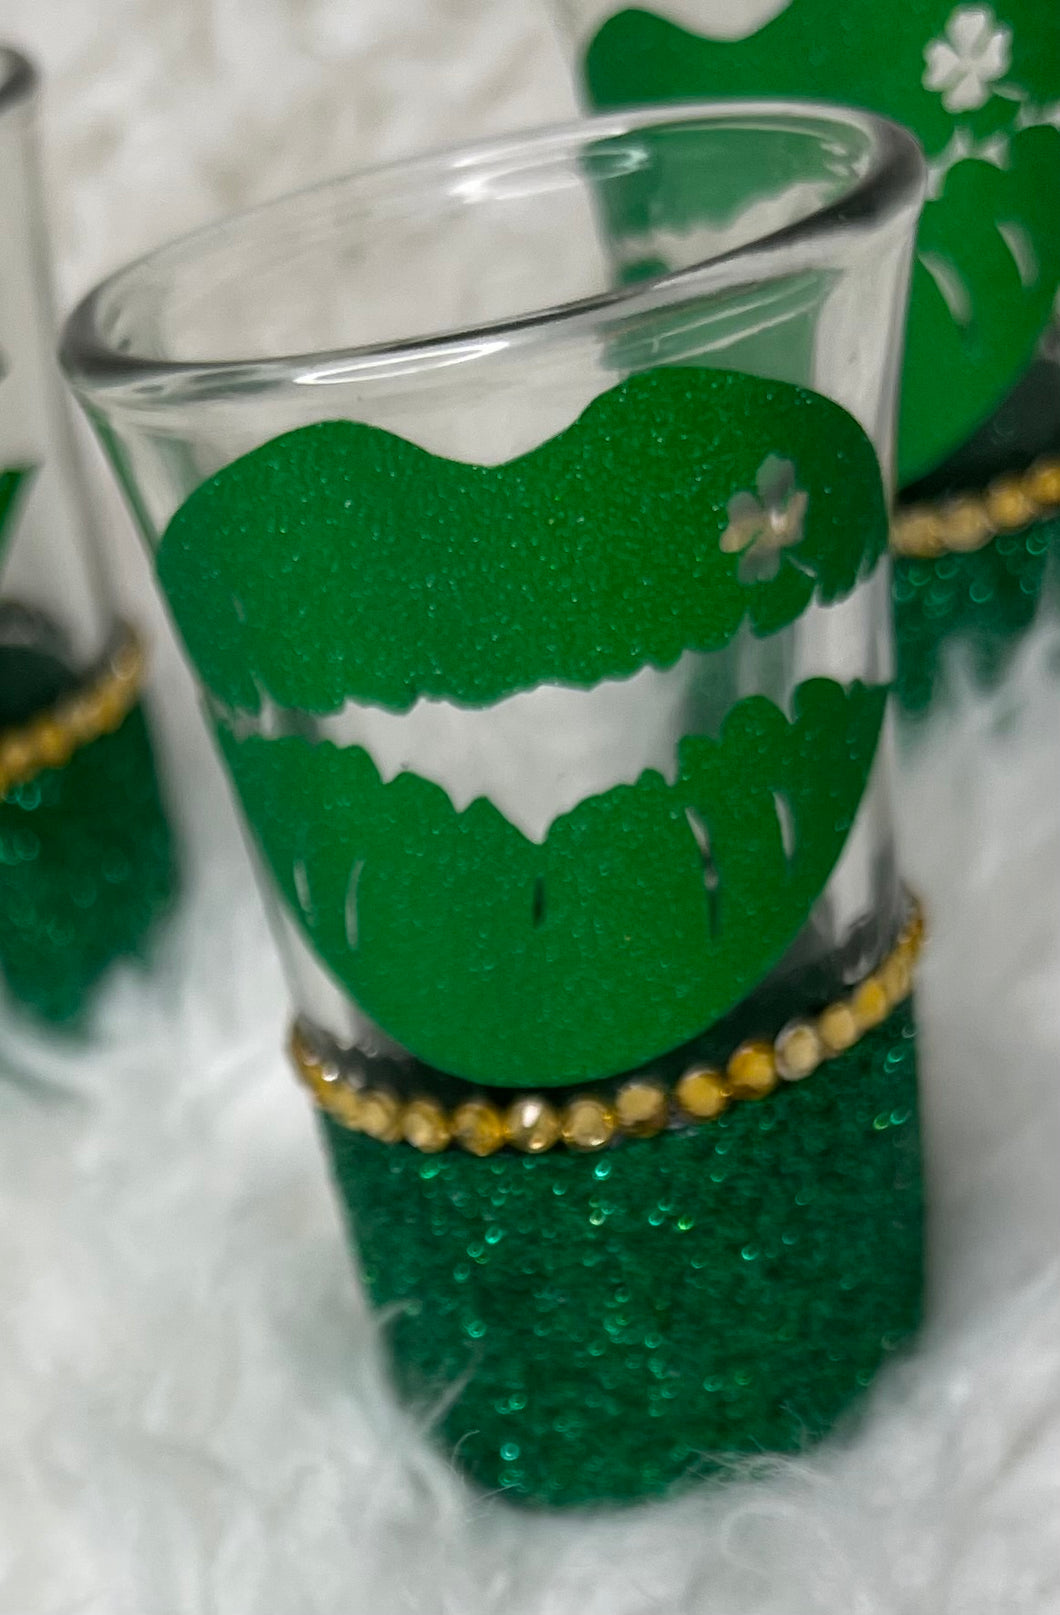 A Kiss of the 4 Leaf Clover Shot Glasses